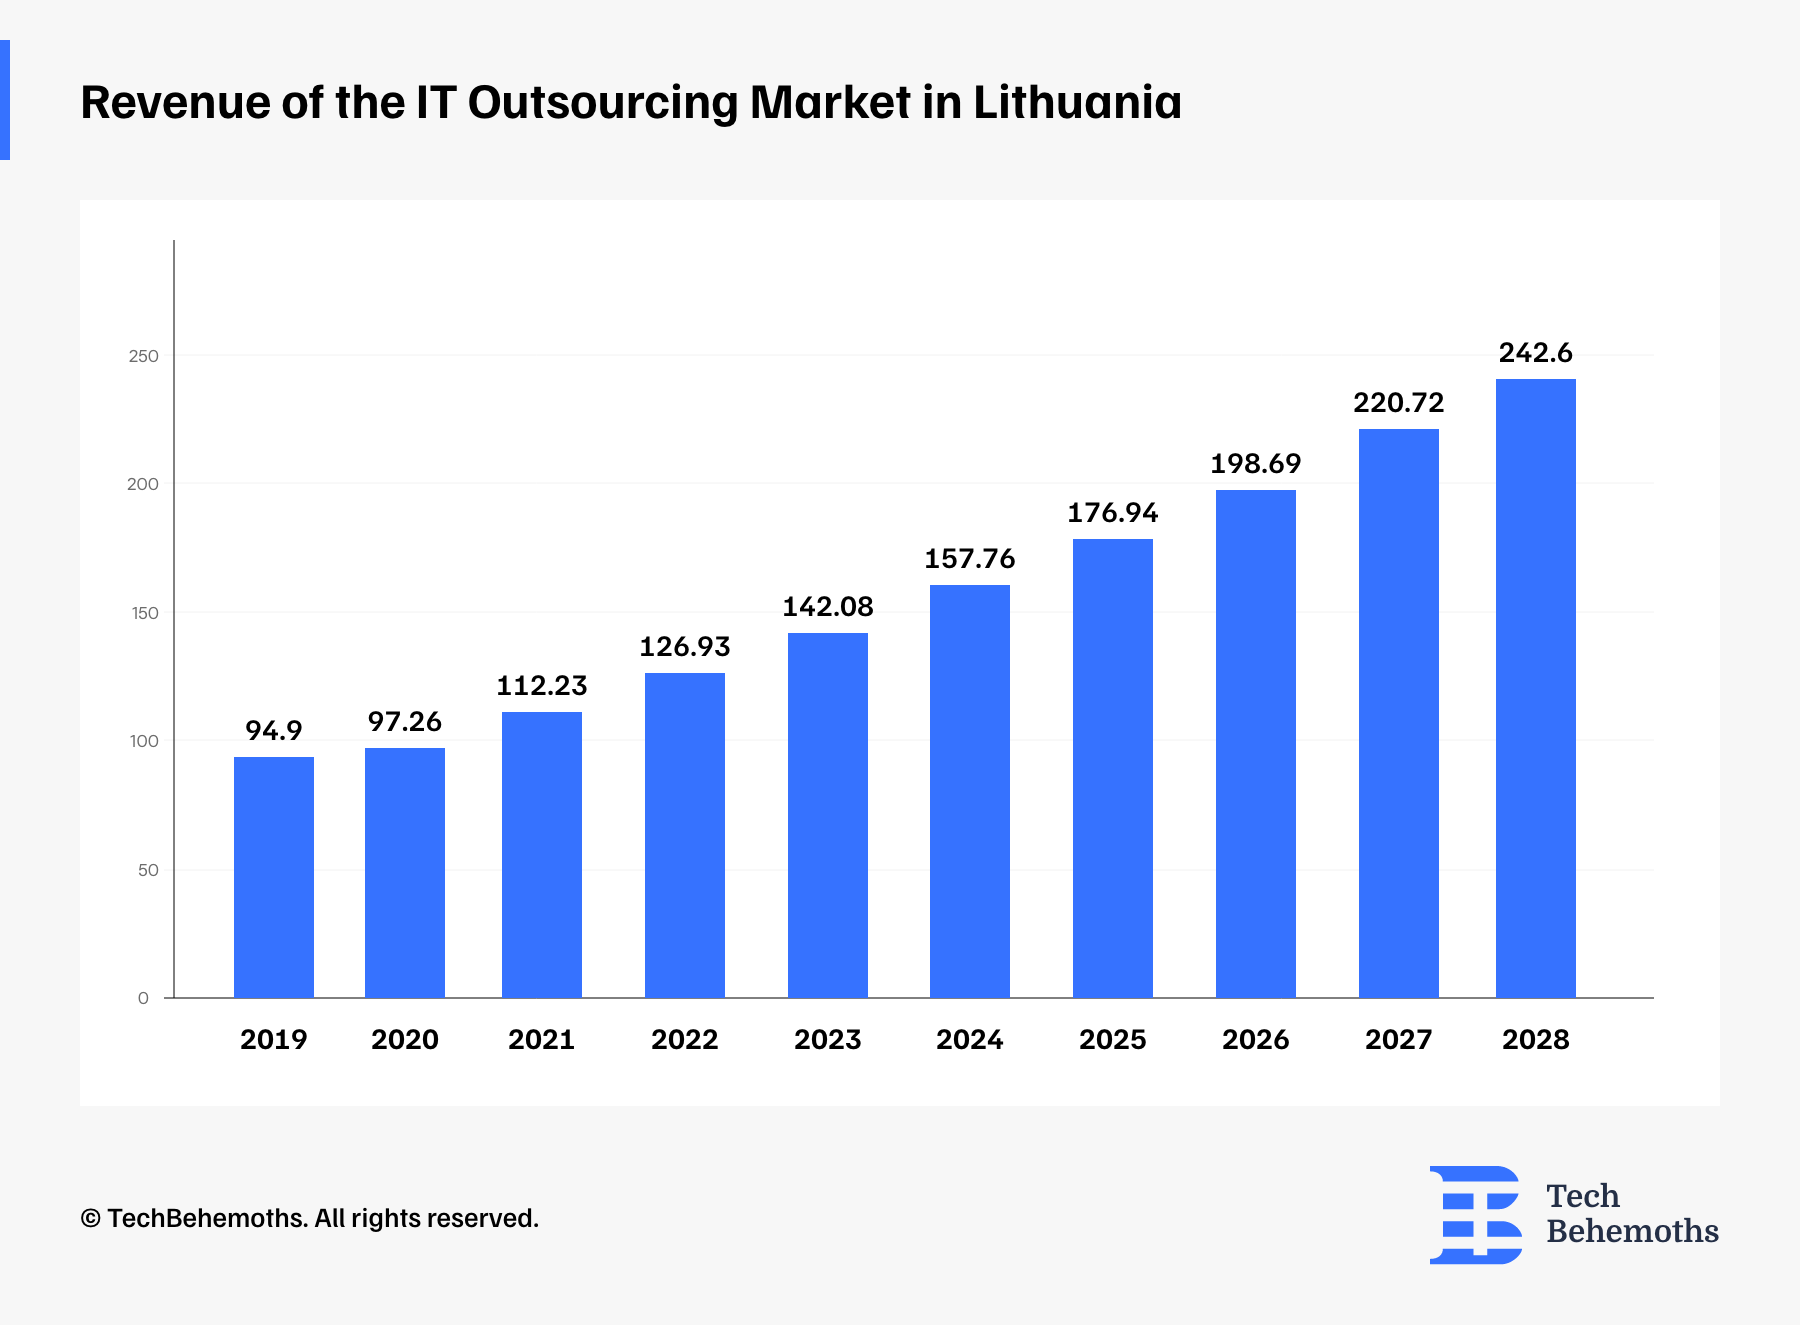 Revenue of the IT Outsourcing Market in Lithuania